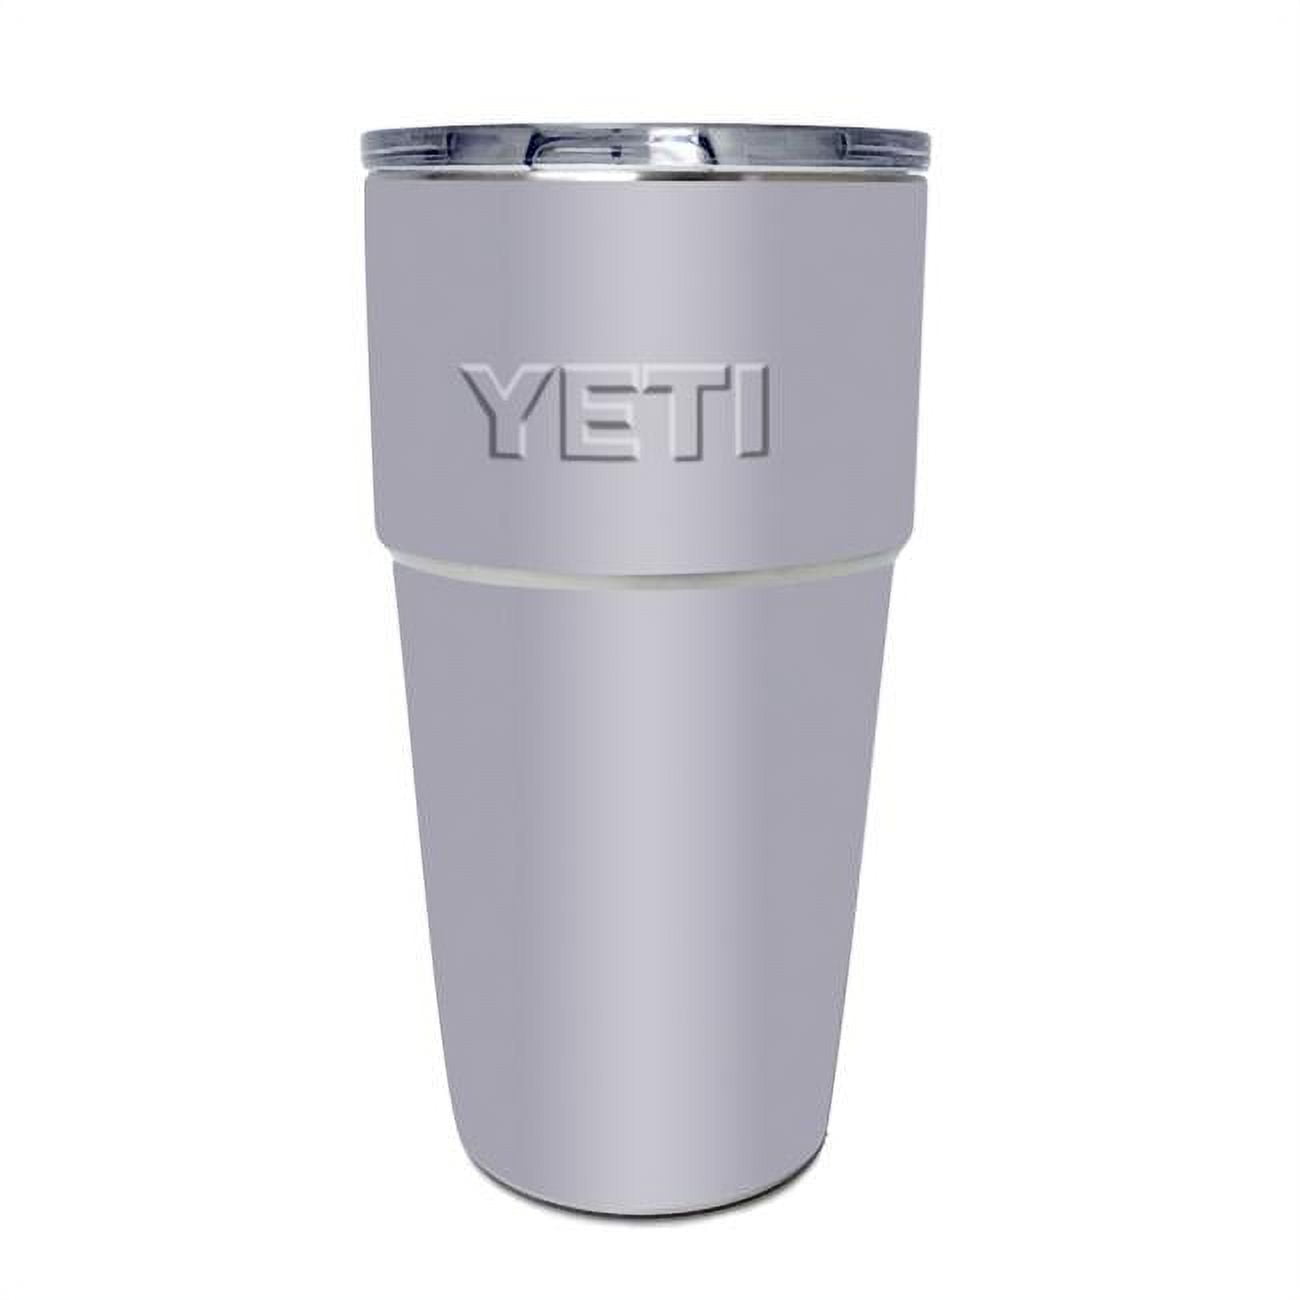 Sherper's - New YETI Rambler 16oz Stackable Pints are now